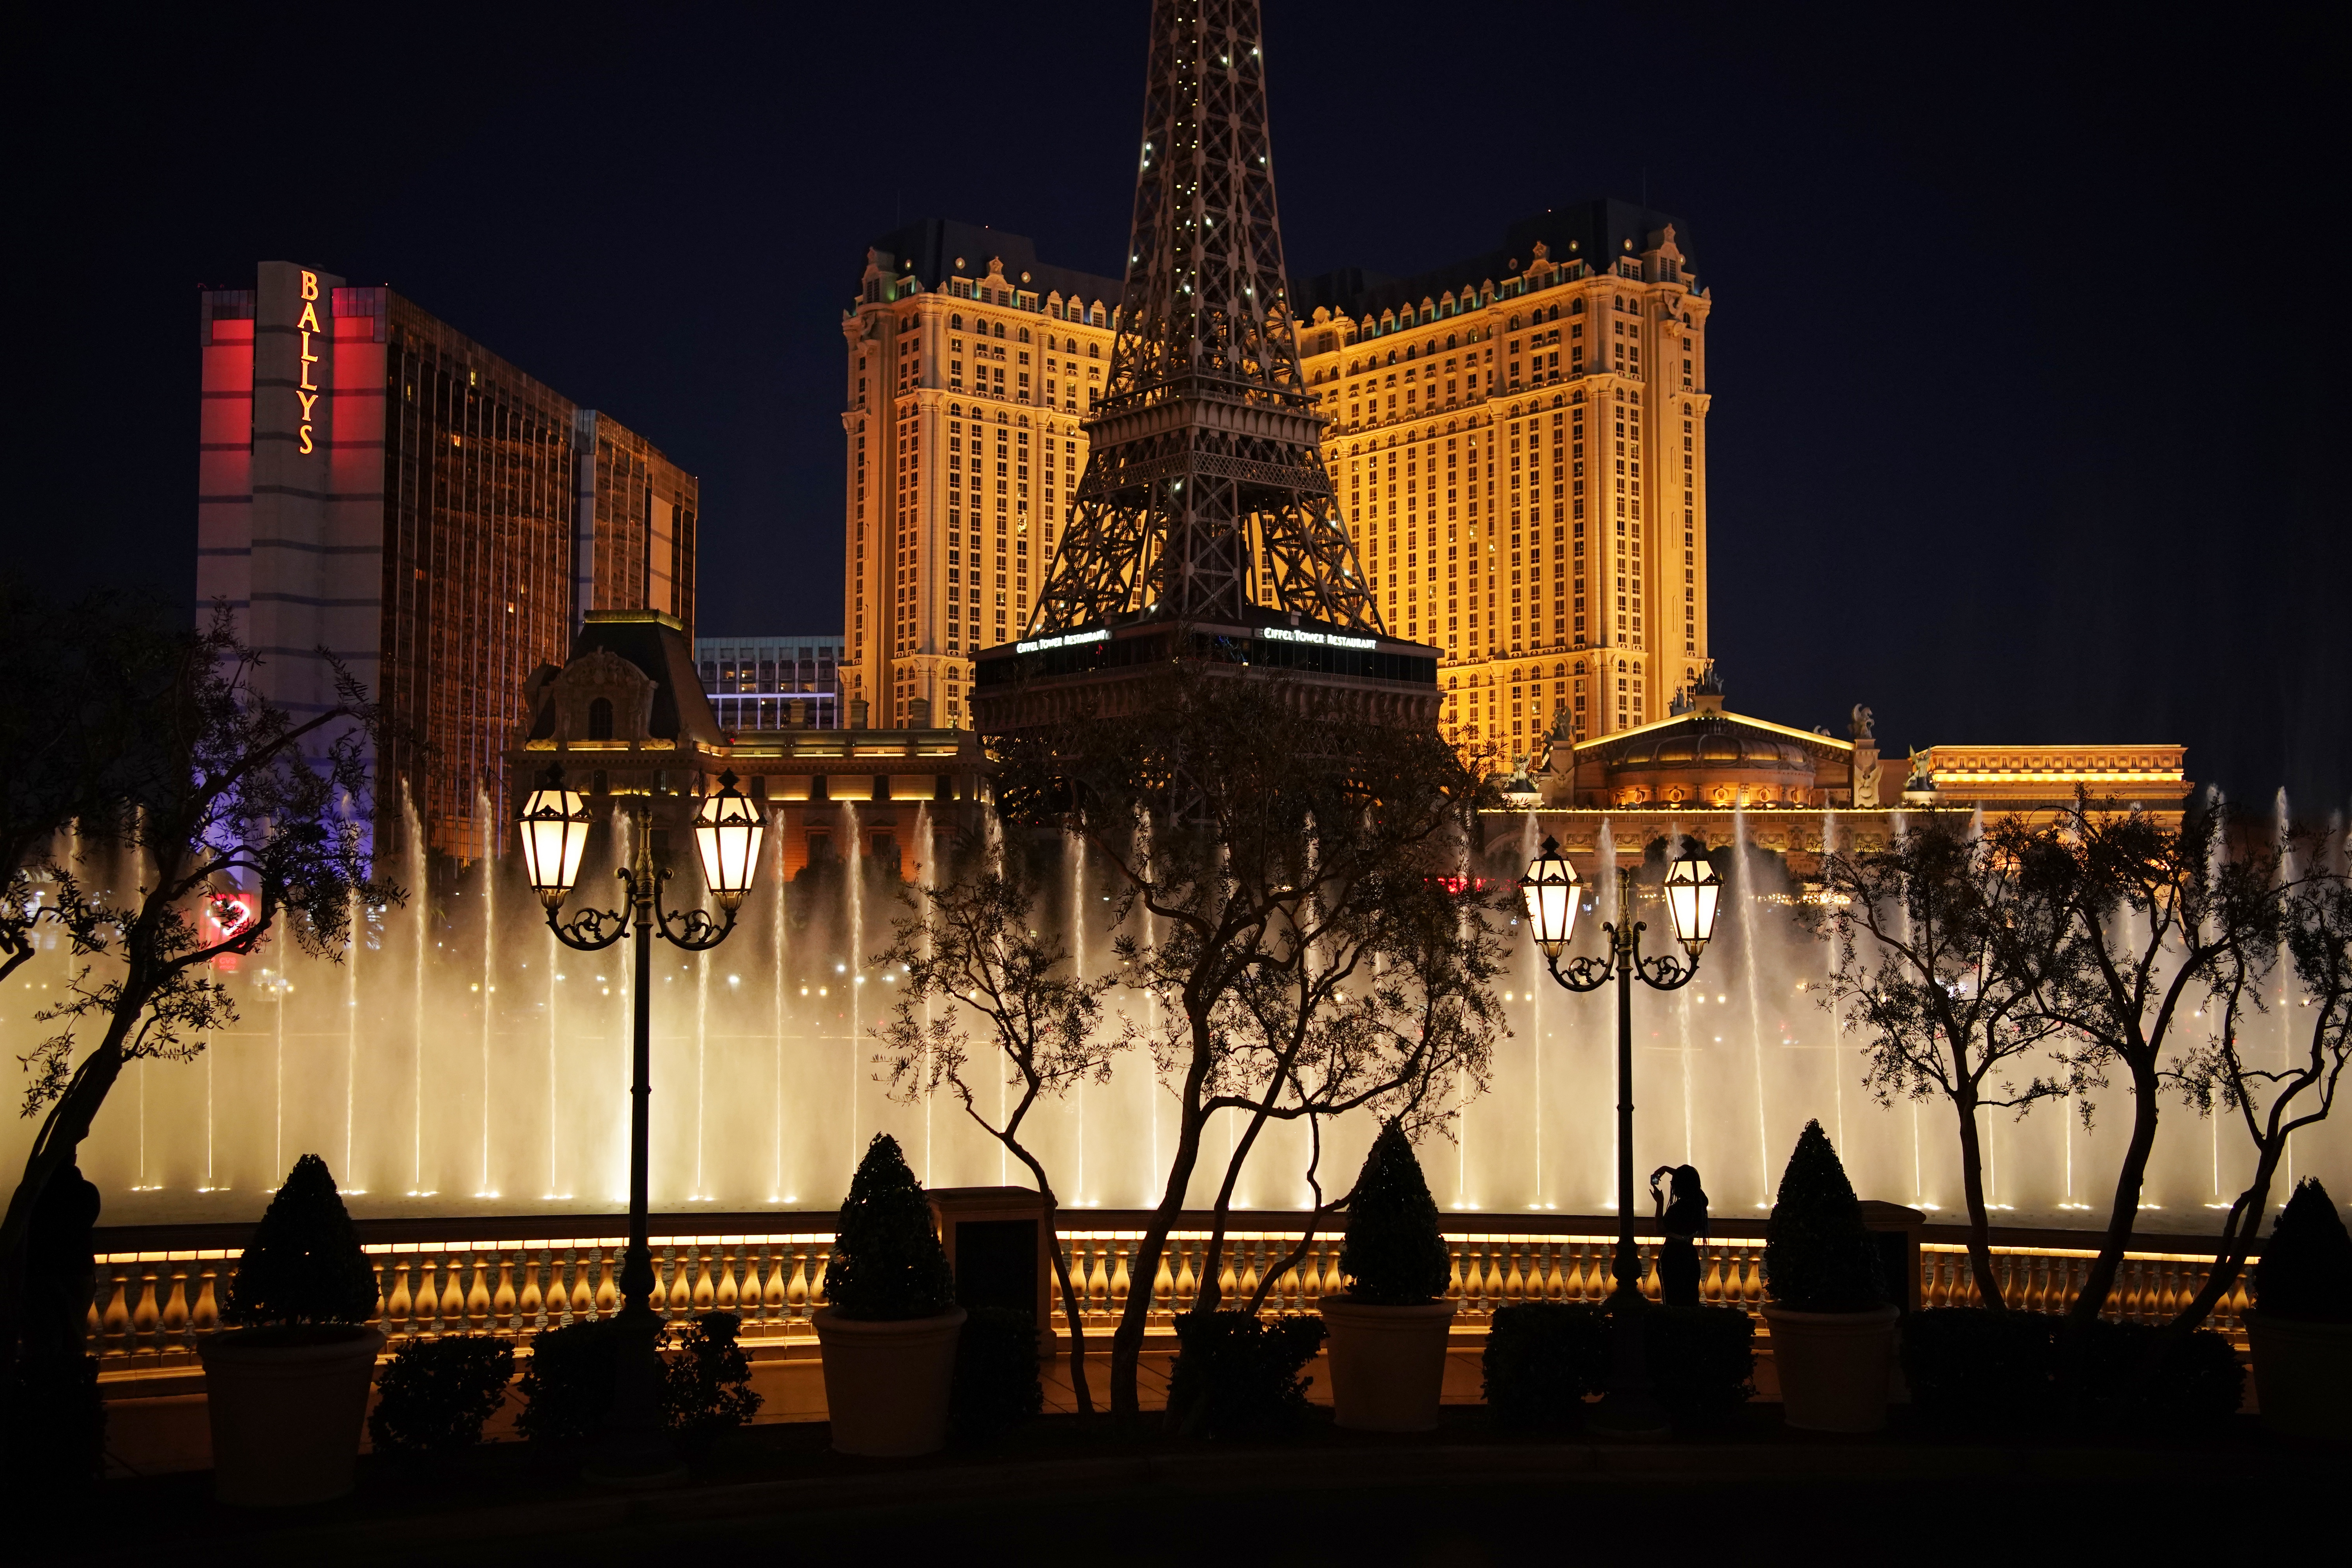 File:Las Vegas Eiffel Tower as seen from the hotel The Bellagio